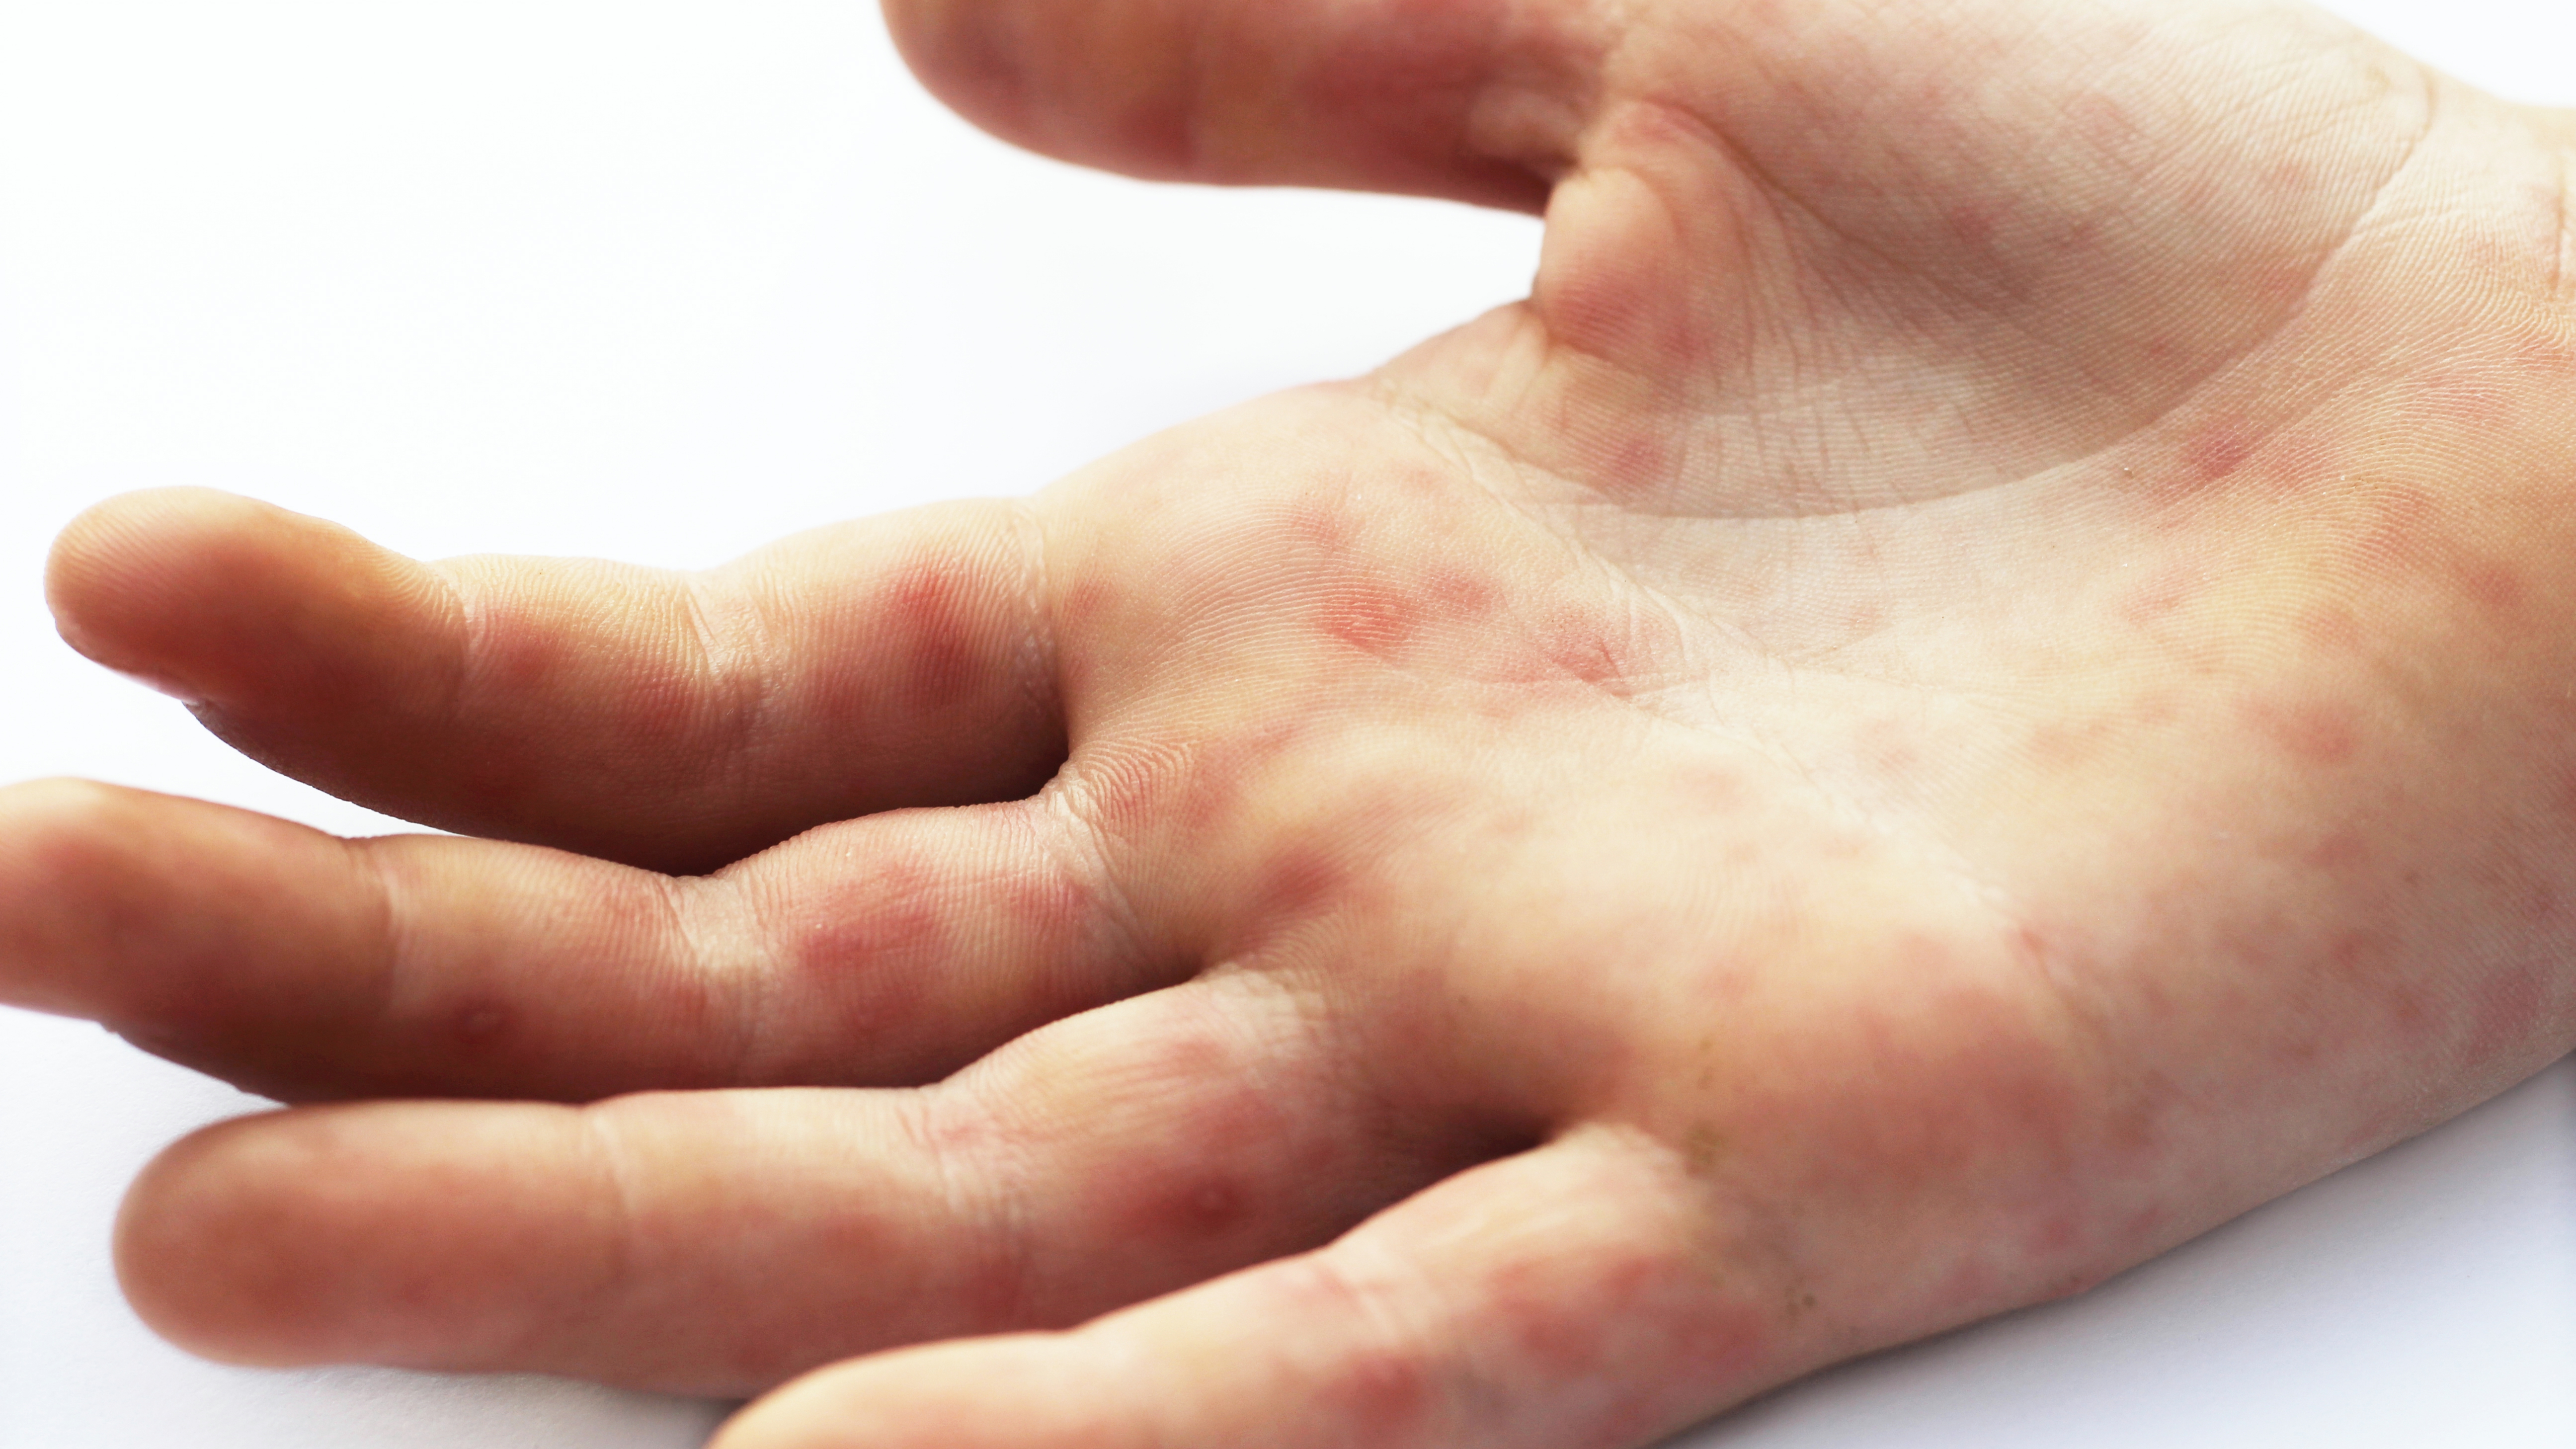 Hand-foot-and-mouth disease - Symptoms & causes - Mayo Clinic